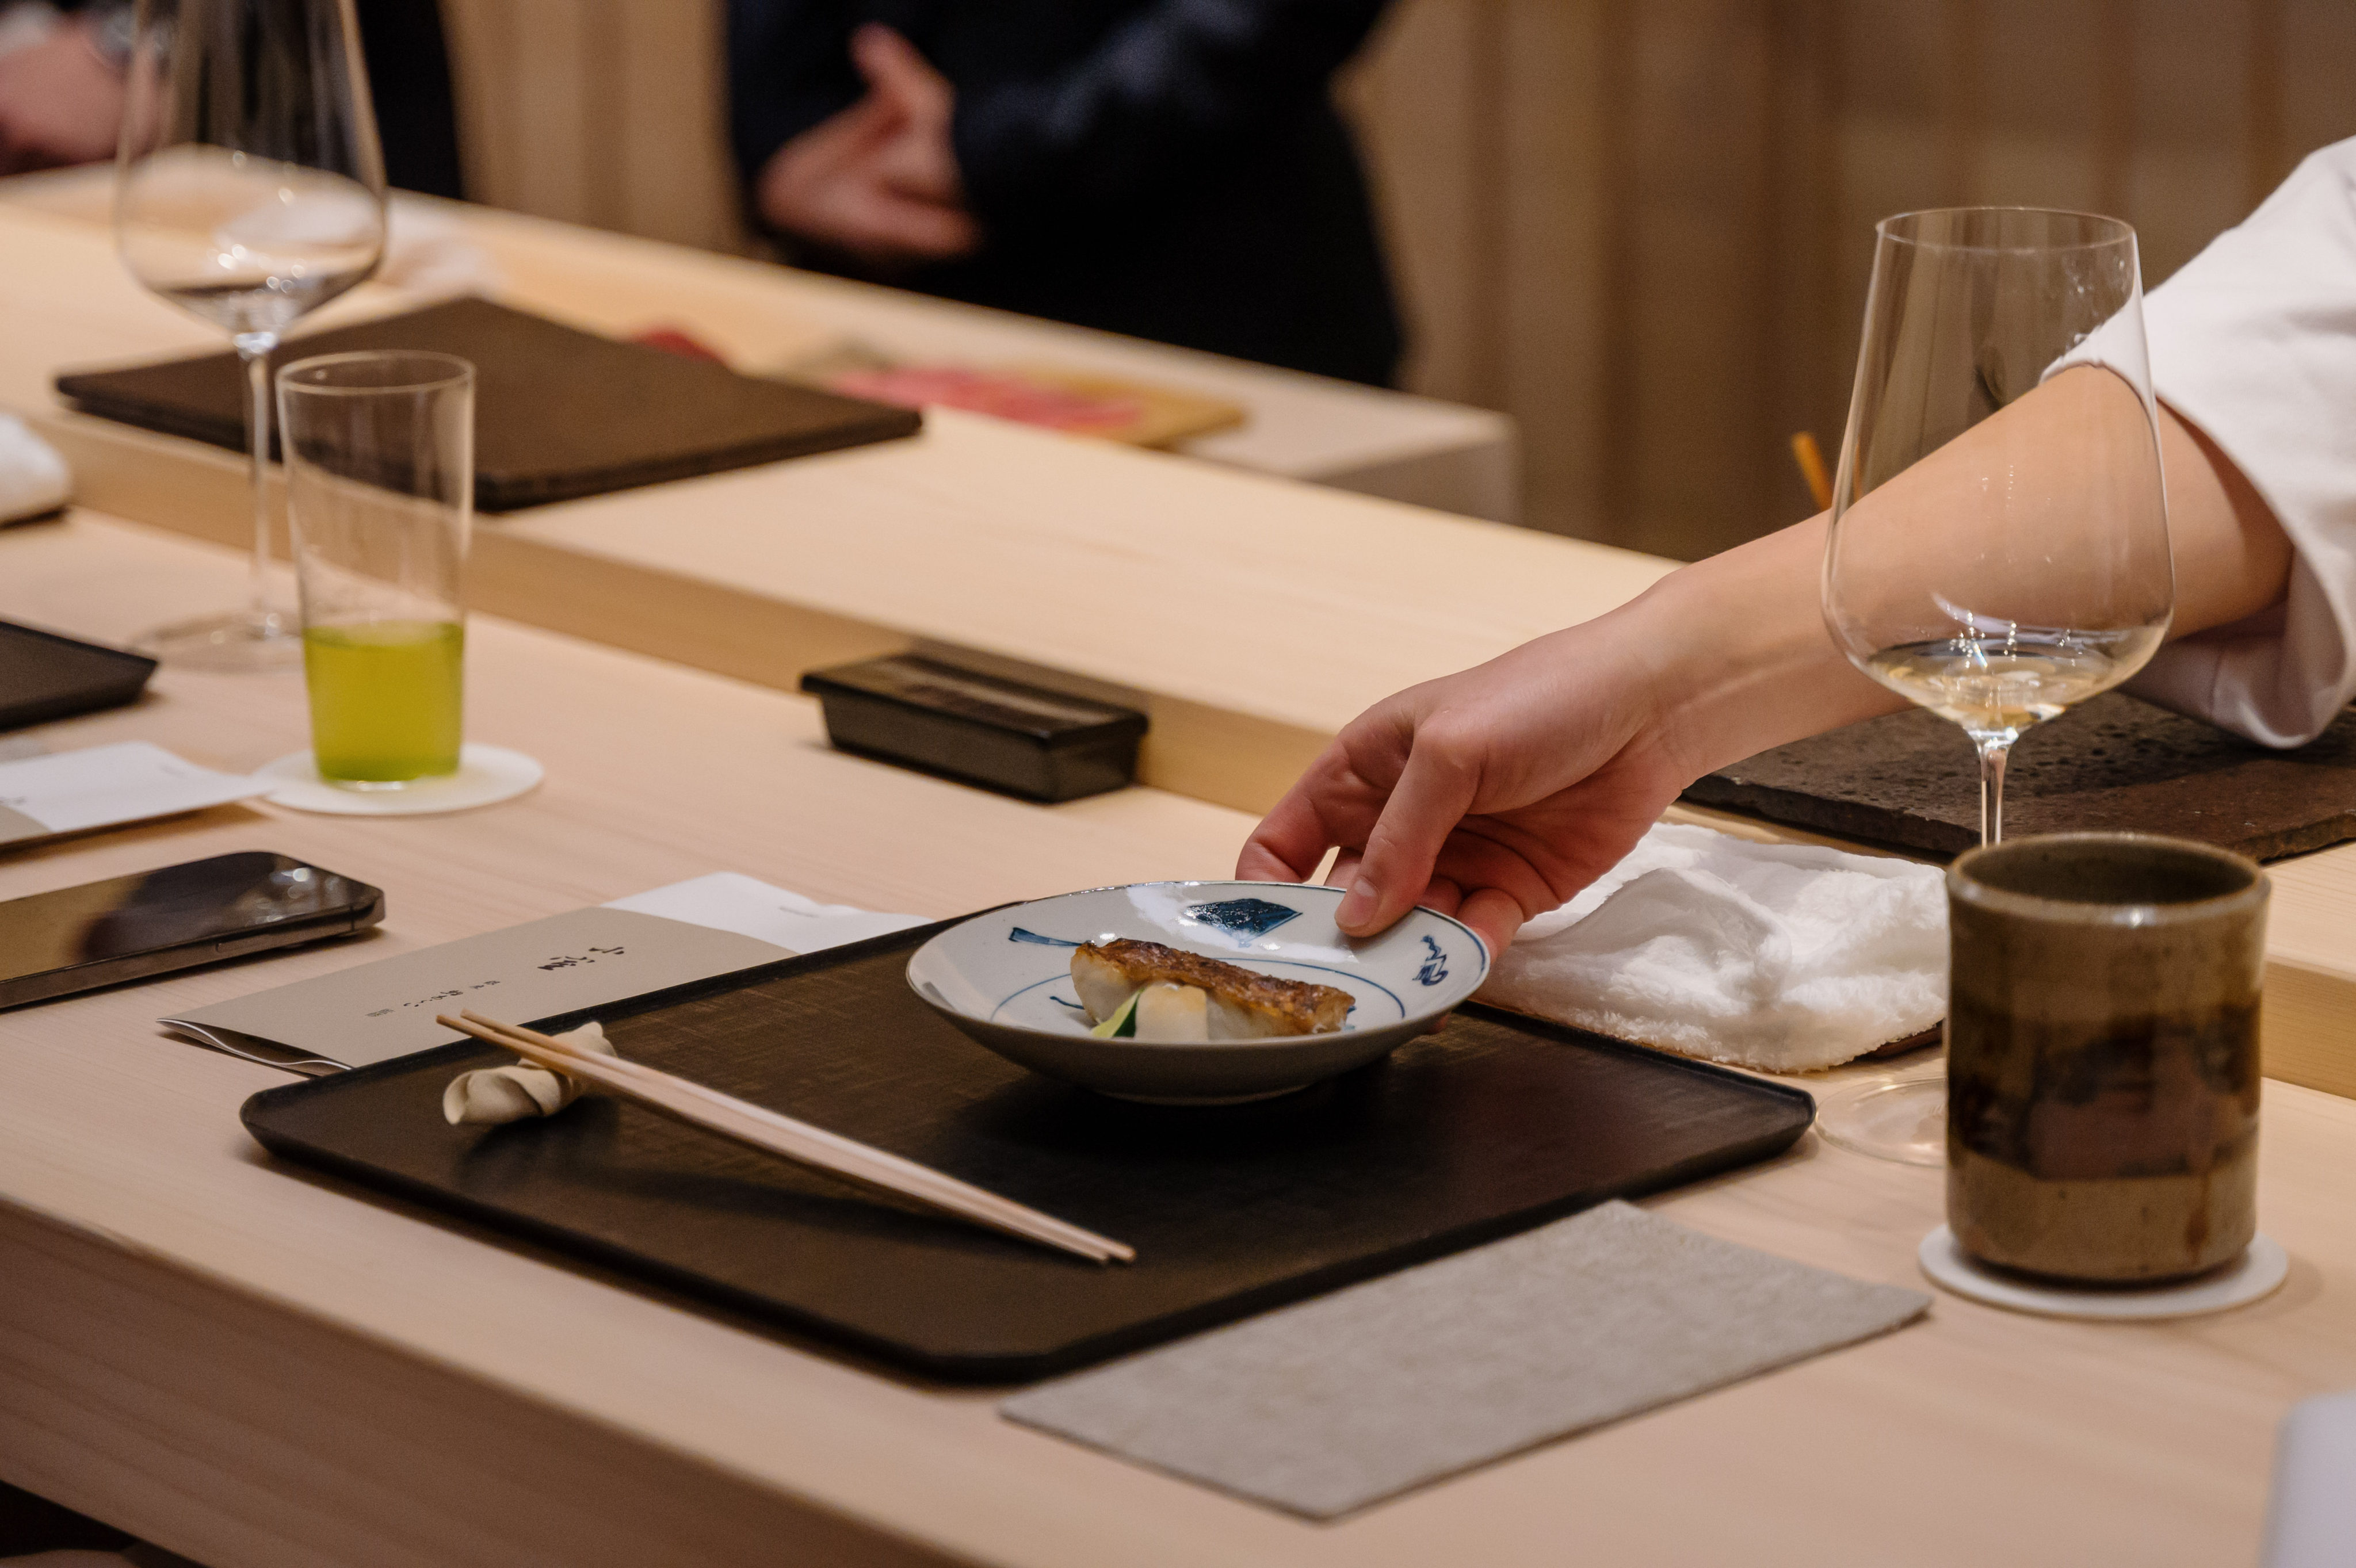 Sushi restaurant Komuro was born of the founders’ vision of creating a small, intimate dining destination. Equally as important to the team in the long term is developing its own sushi style that incorporates more Chinese elements. Photo: Komuro